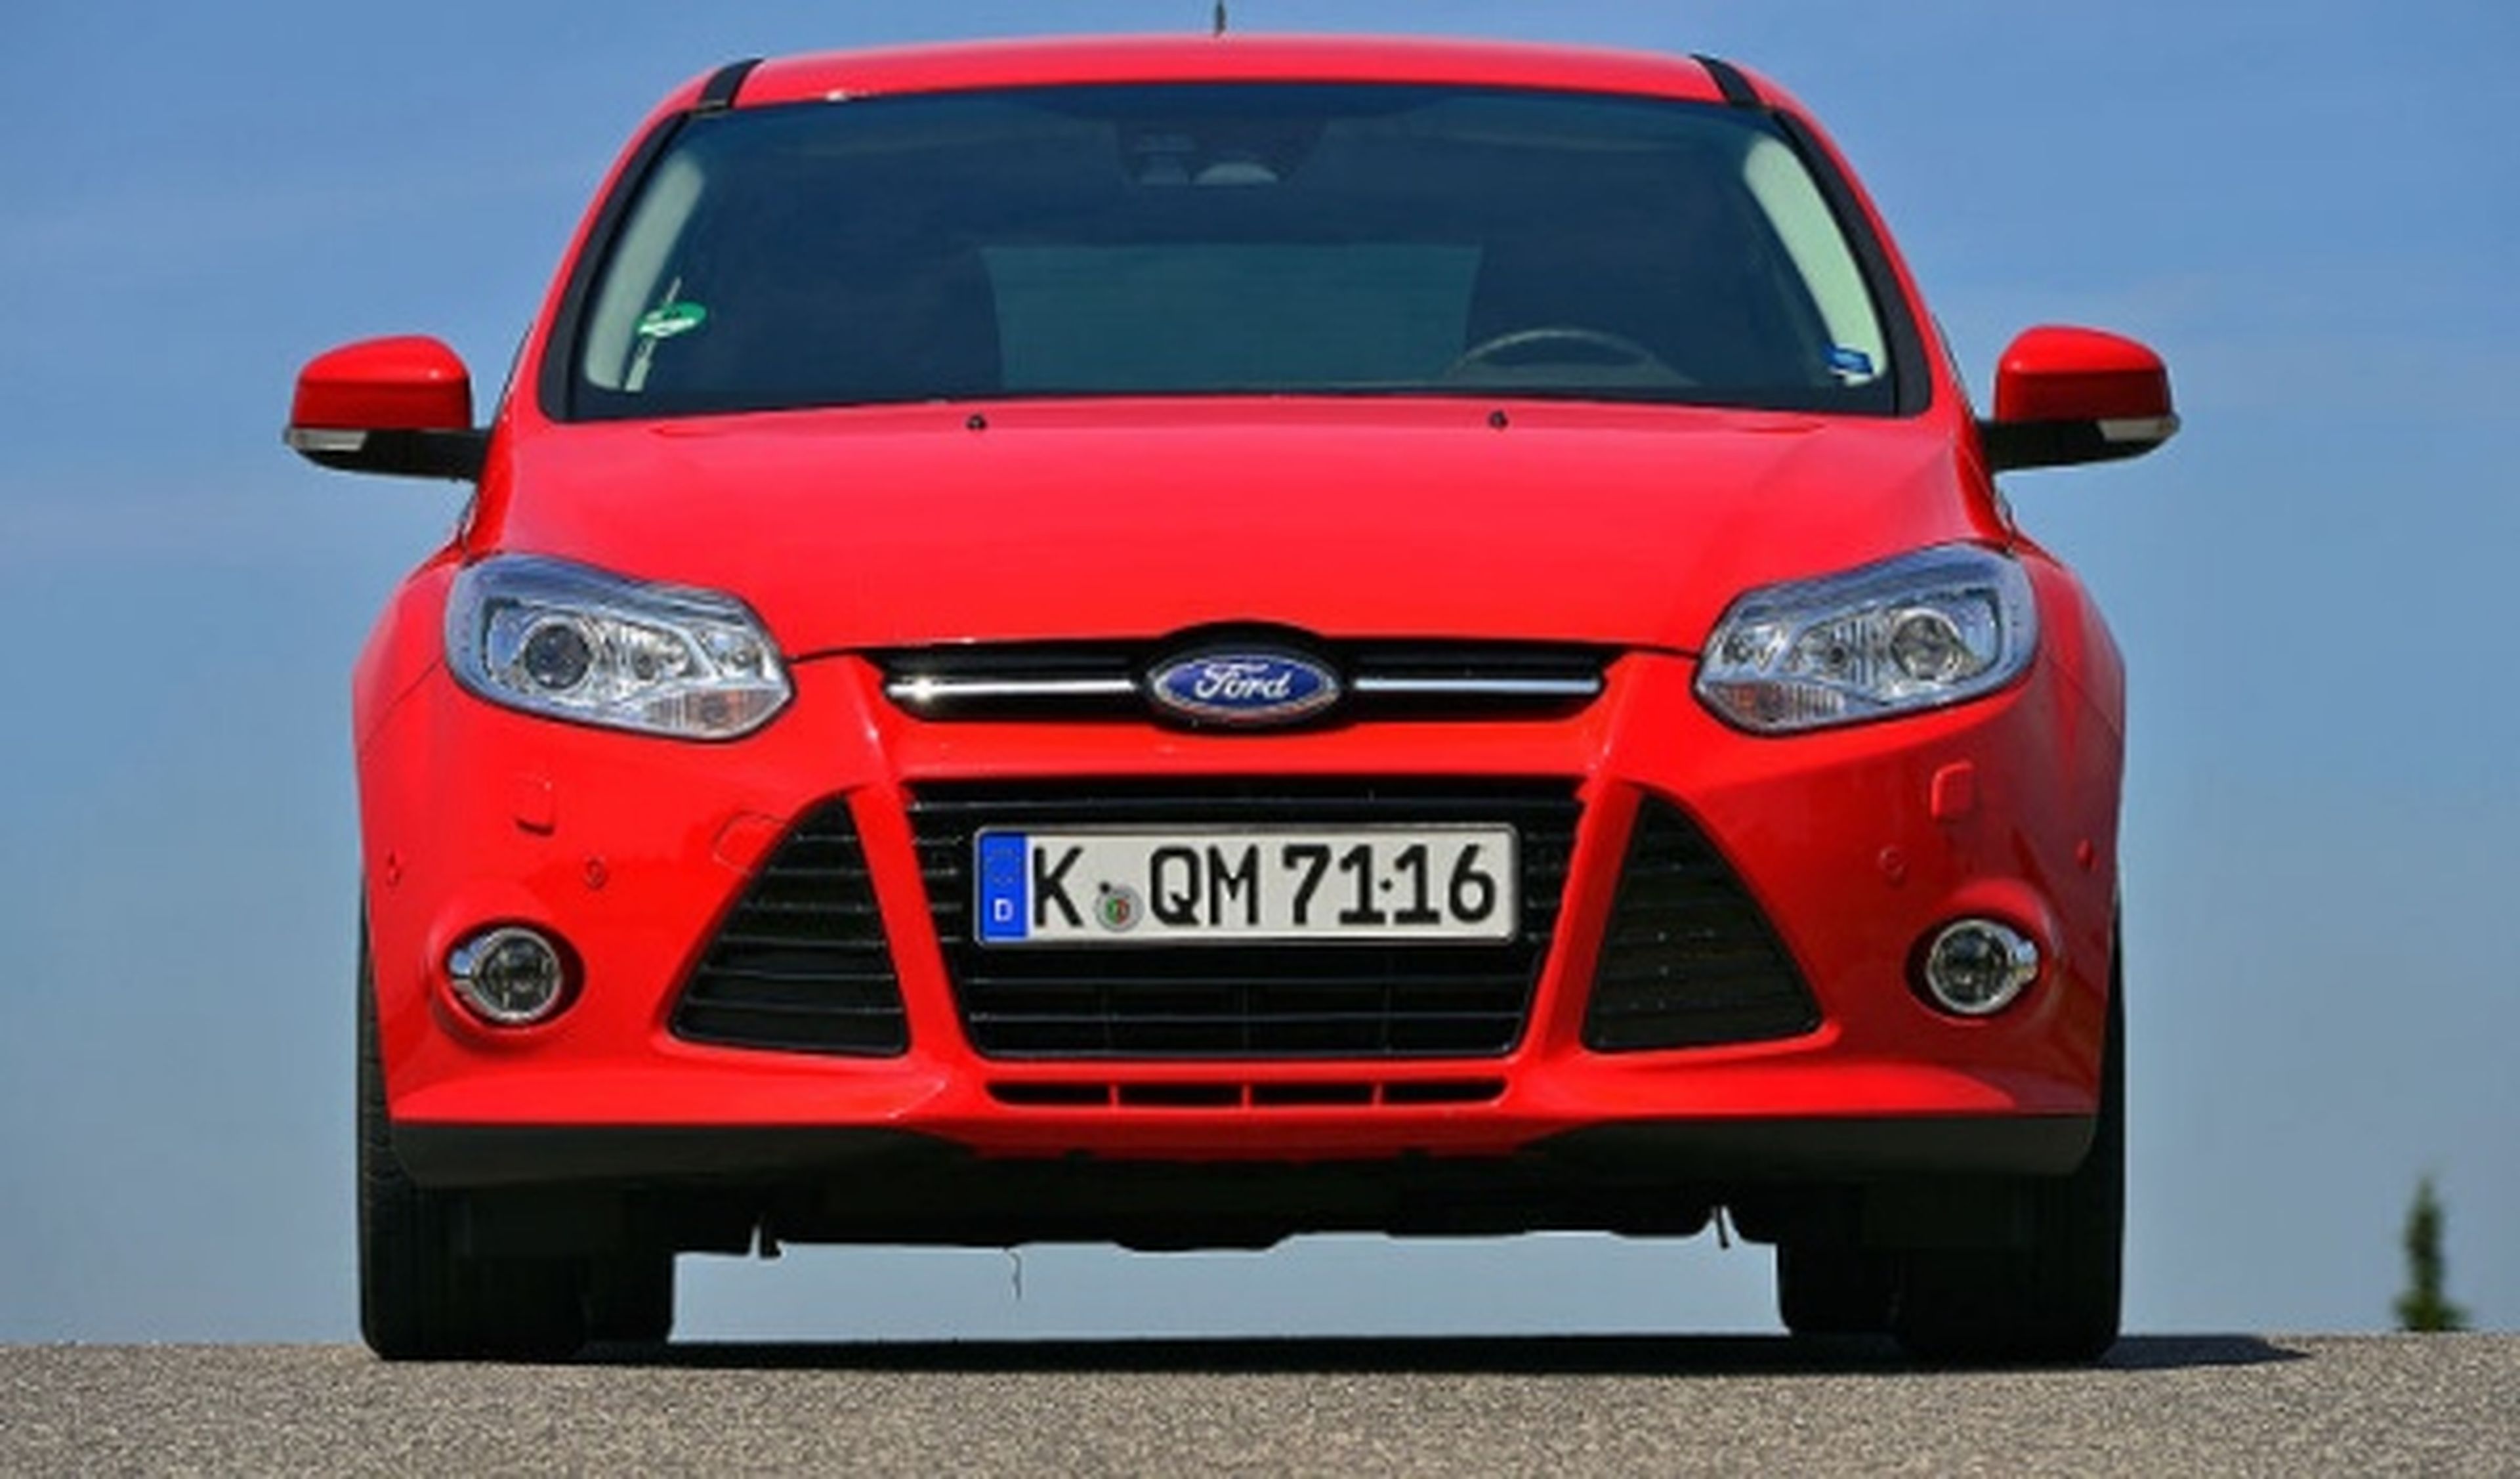 Ford Focus frontal